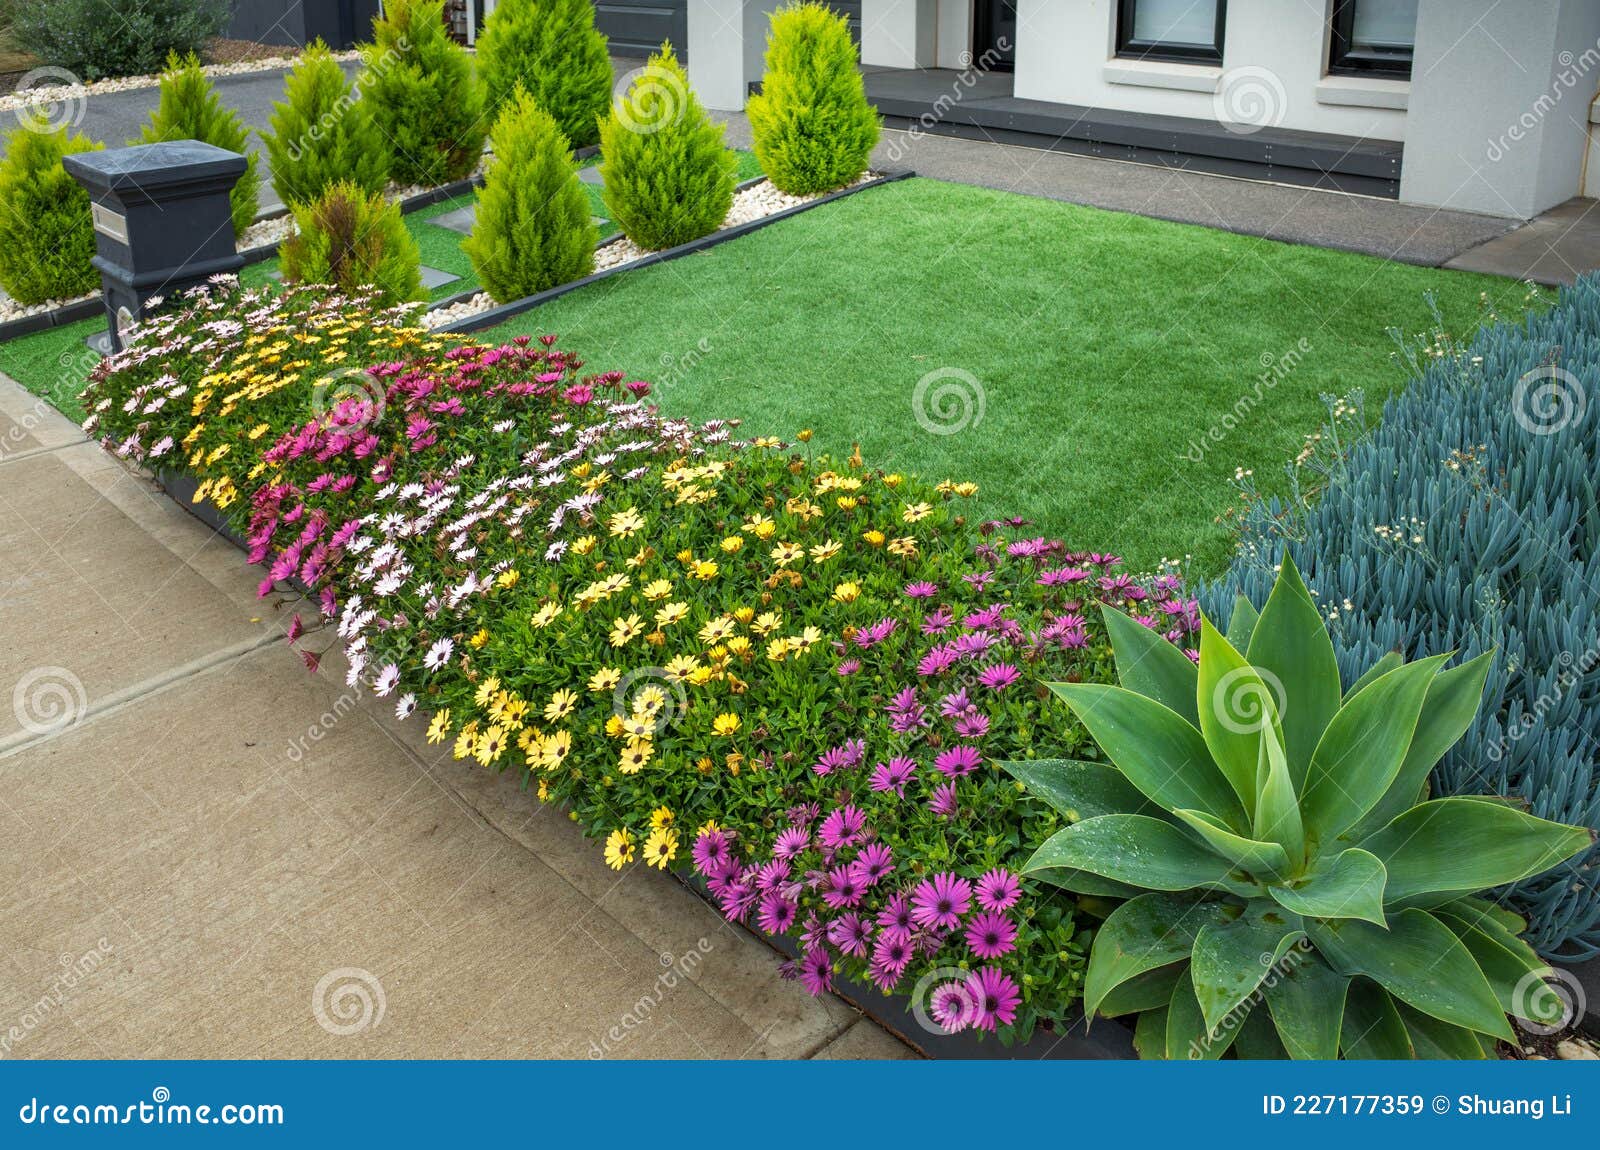 A Landscaped Small Front Yard With Different Plants And Synthetic Turf Stock Image Image Of Design Driveway  - Small Front Yard Landscaping Ideas Australia